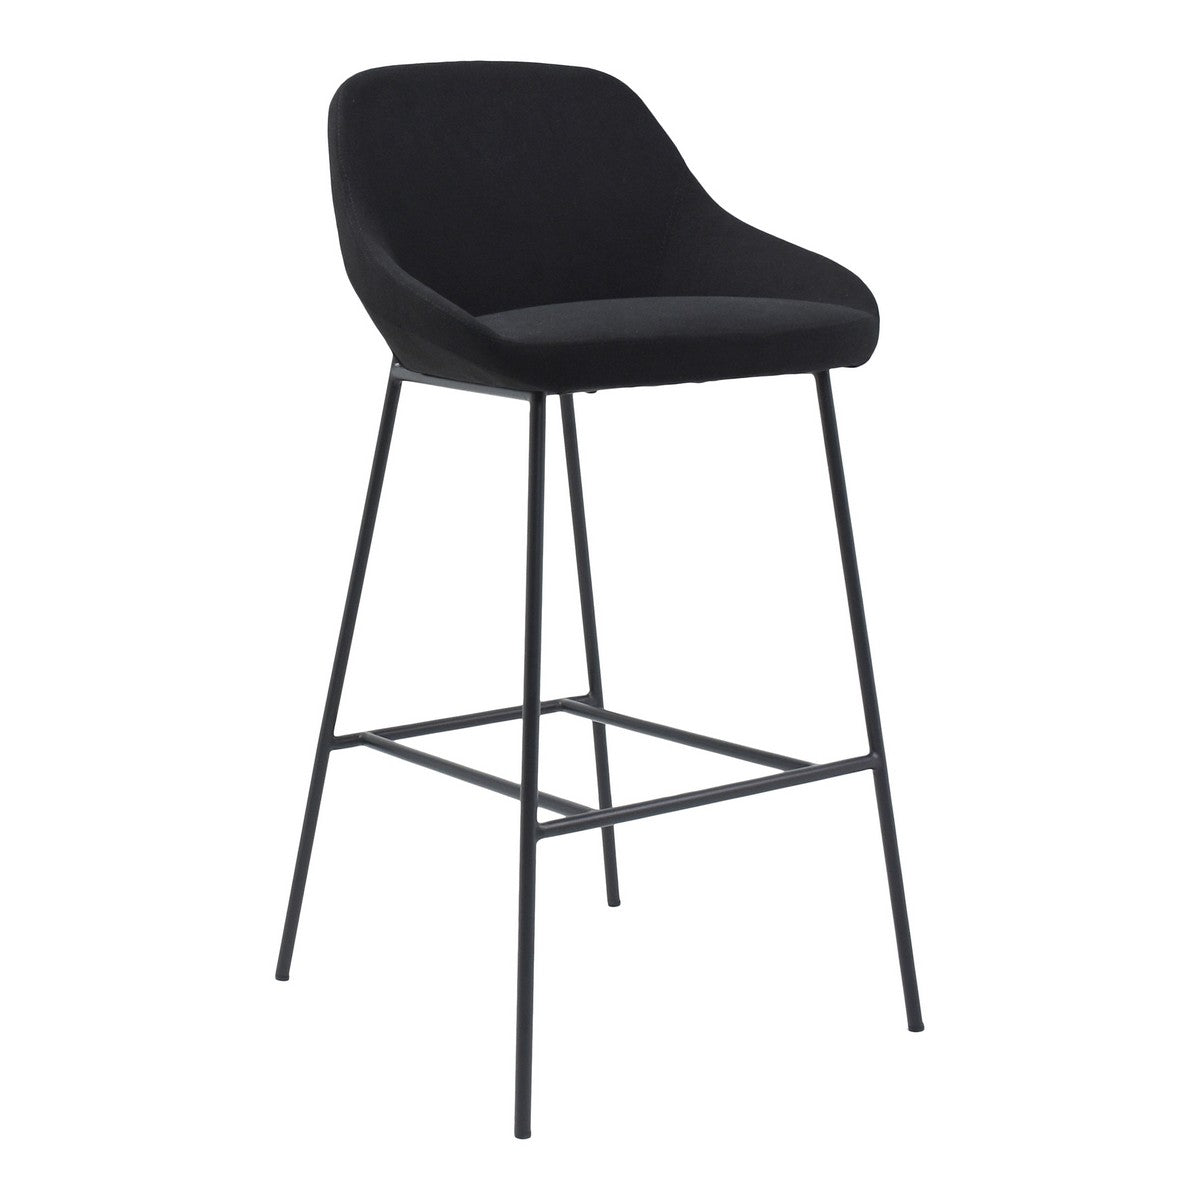 Moe's Home Collection Shelby Barstool Black - EJ-1039-02